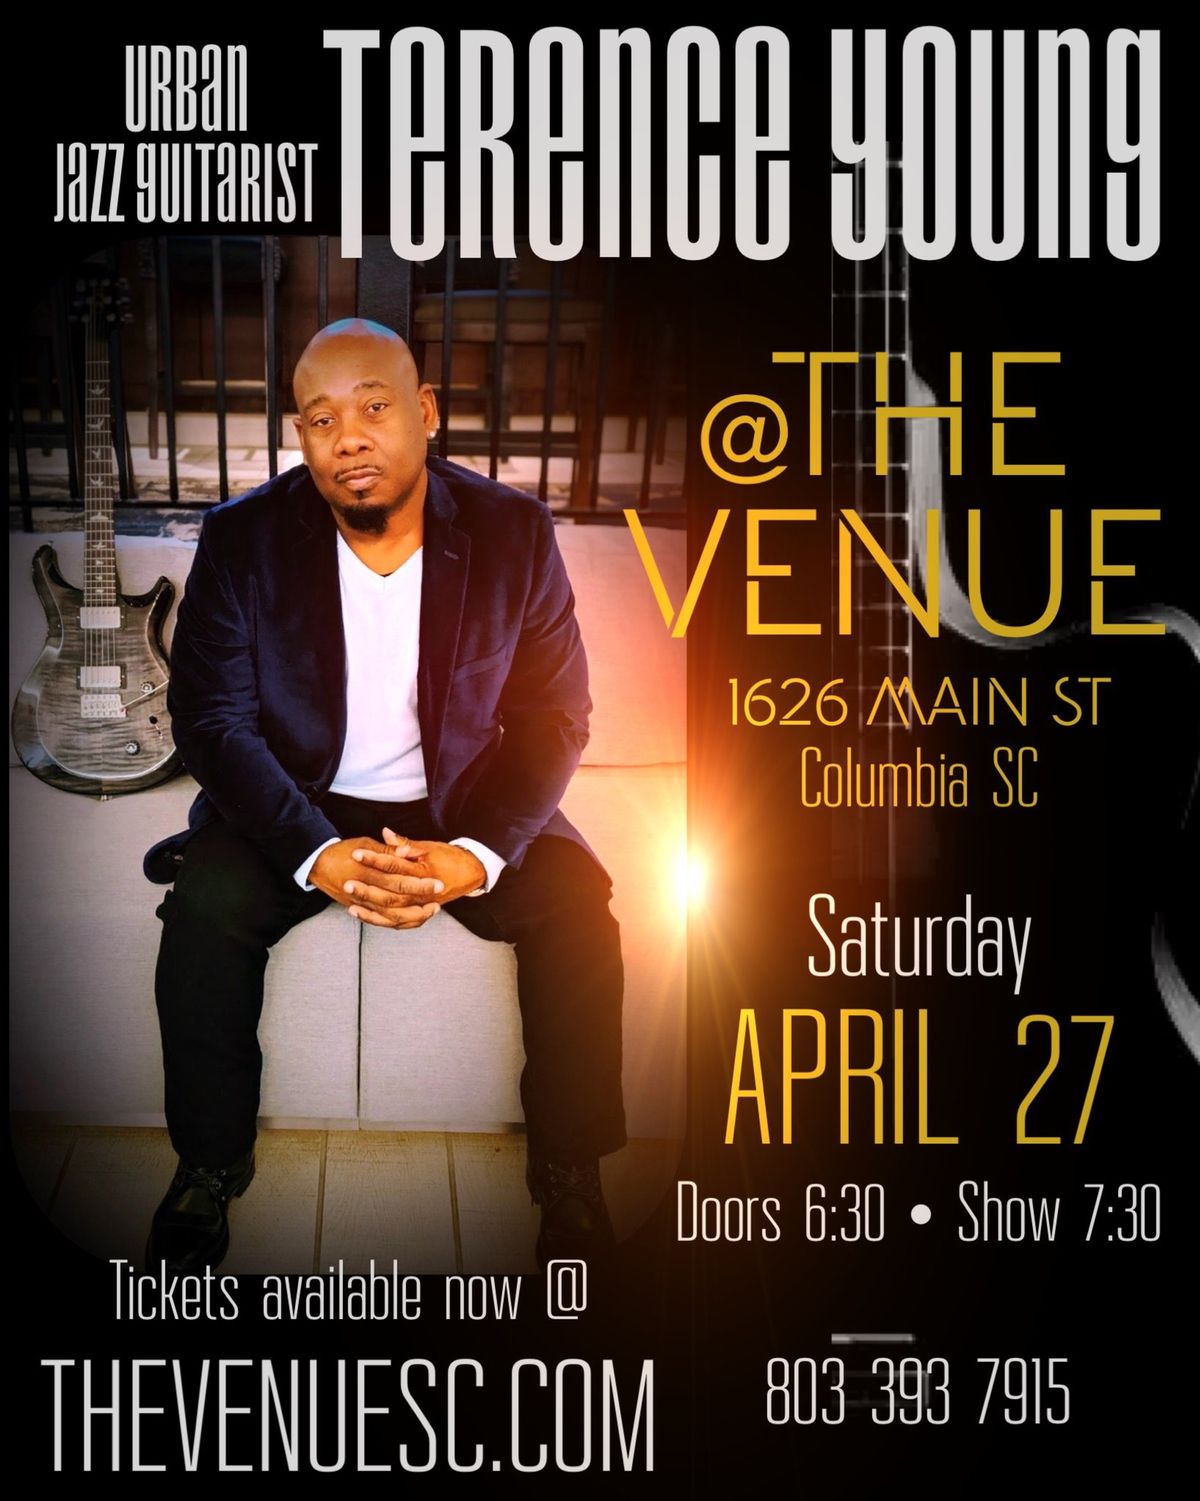 Jazz at The Venue featuring Urban Guitarist Terence Young